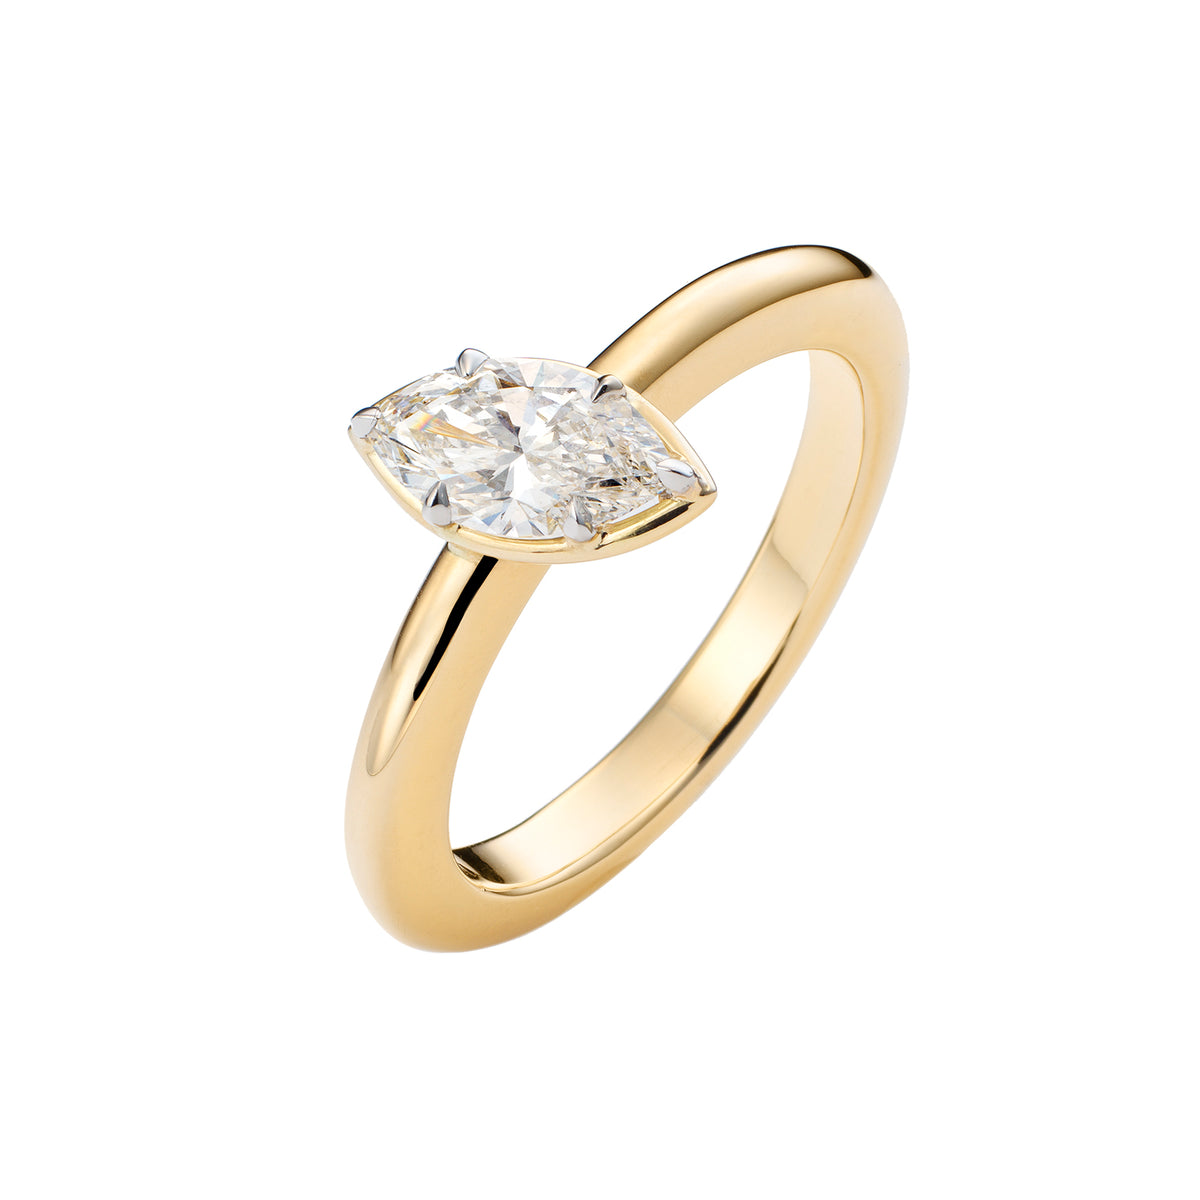 you(r) turn ring _ 18kt gelbgold